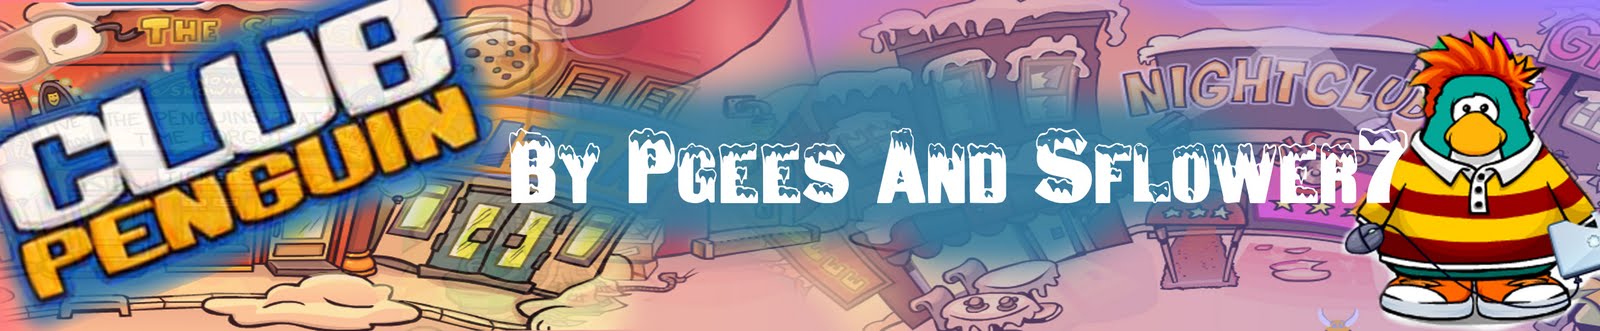 pgees games [ chobot games ]